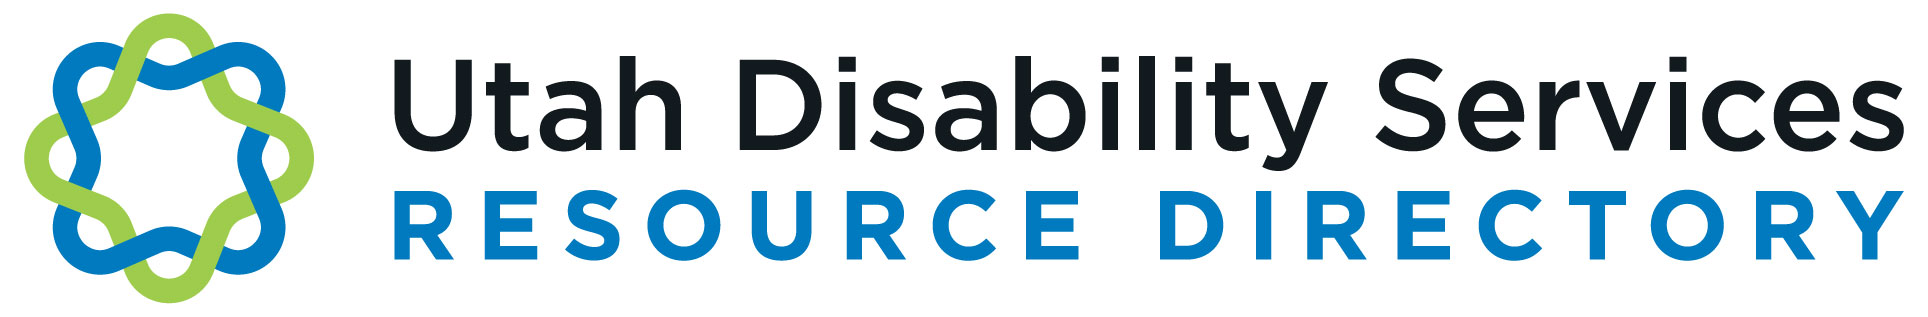 Utah Disability Services Resource Directory